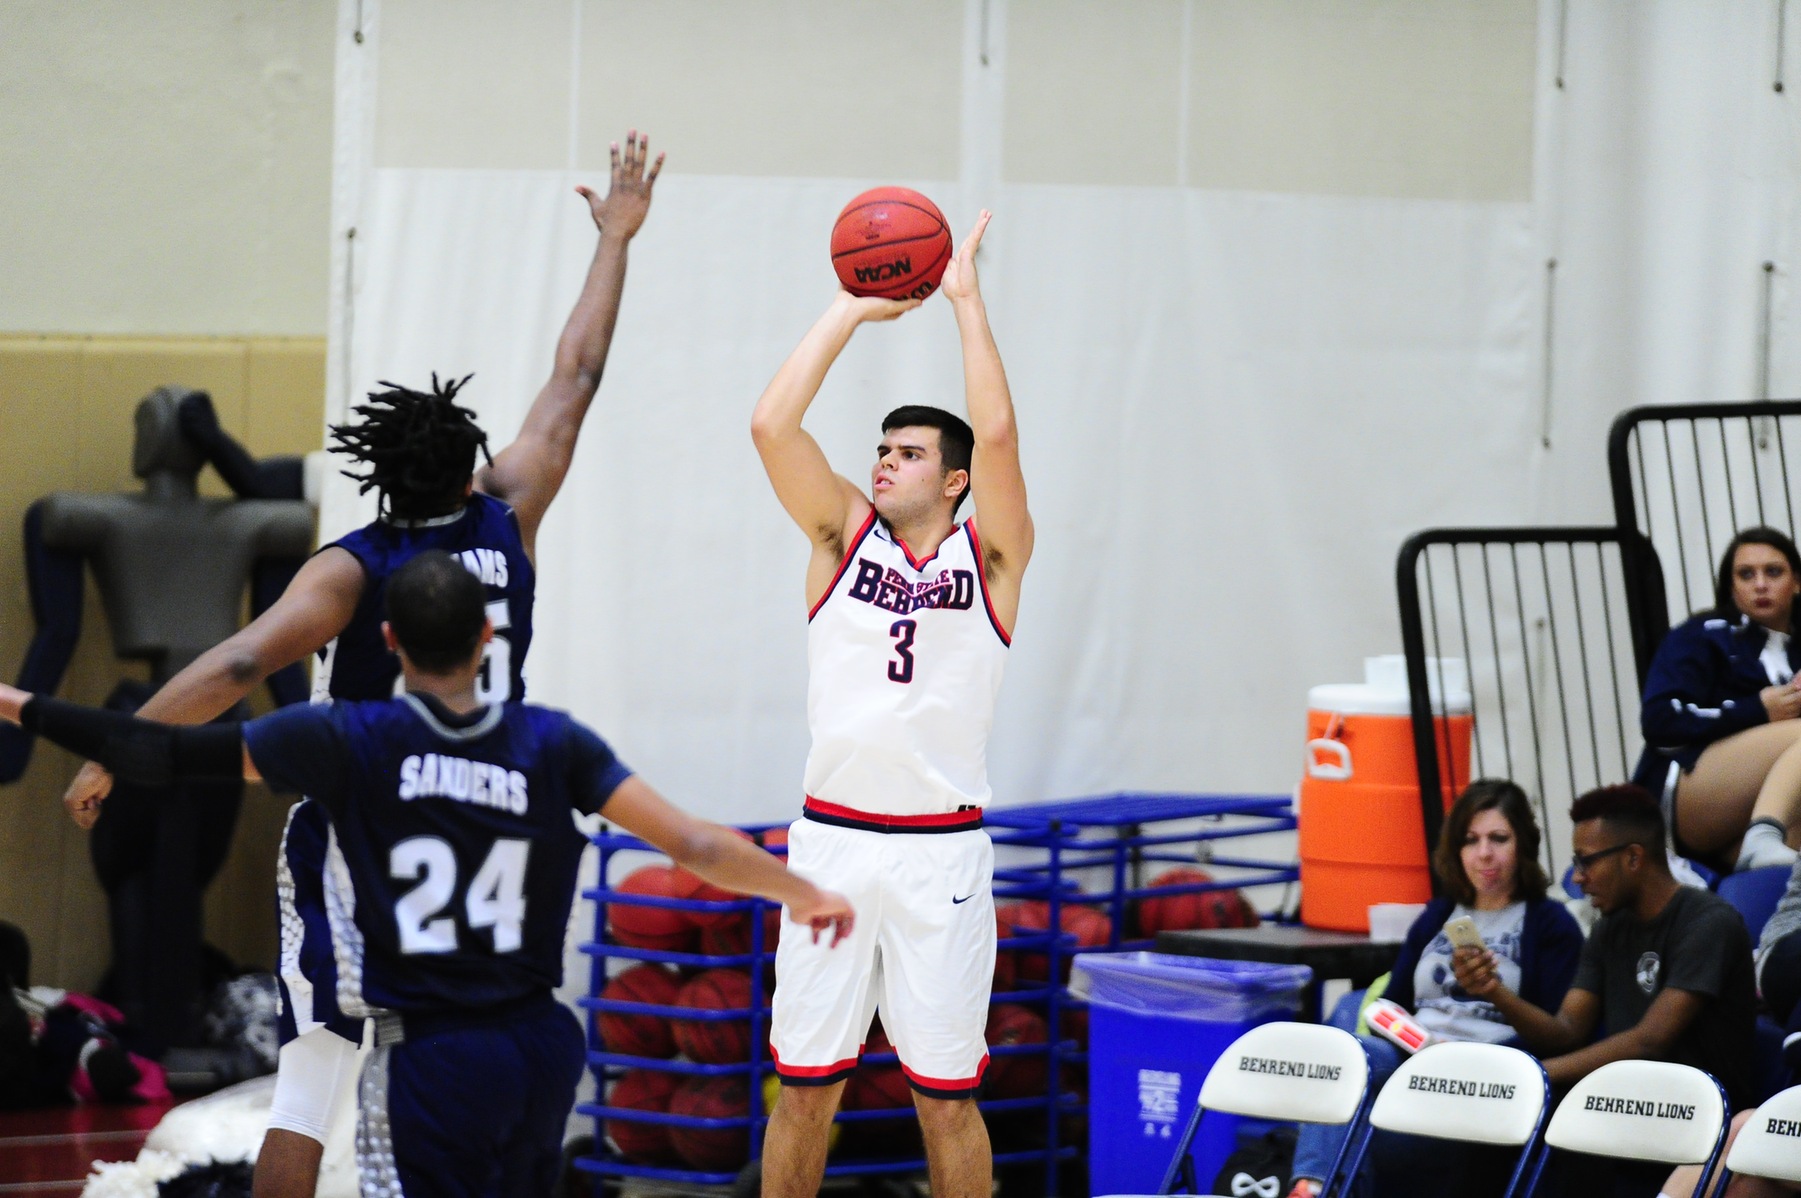 Lions Hold Off Hilbert For Thrilling AMCC Win